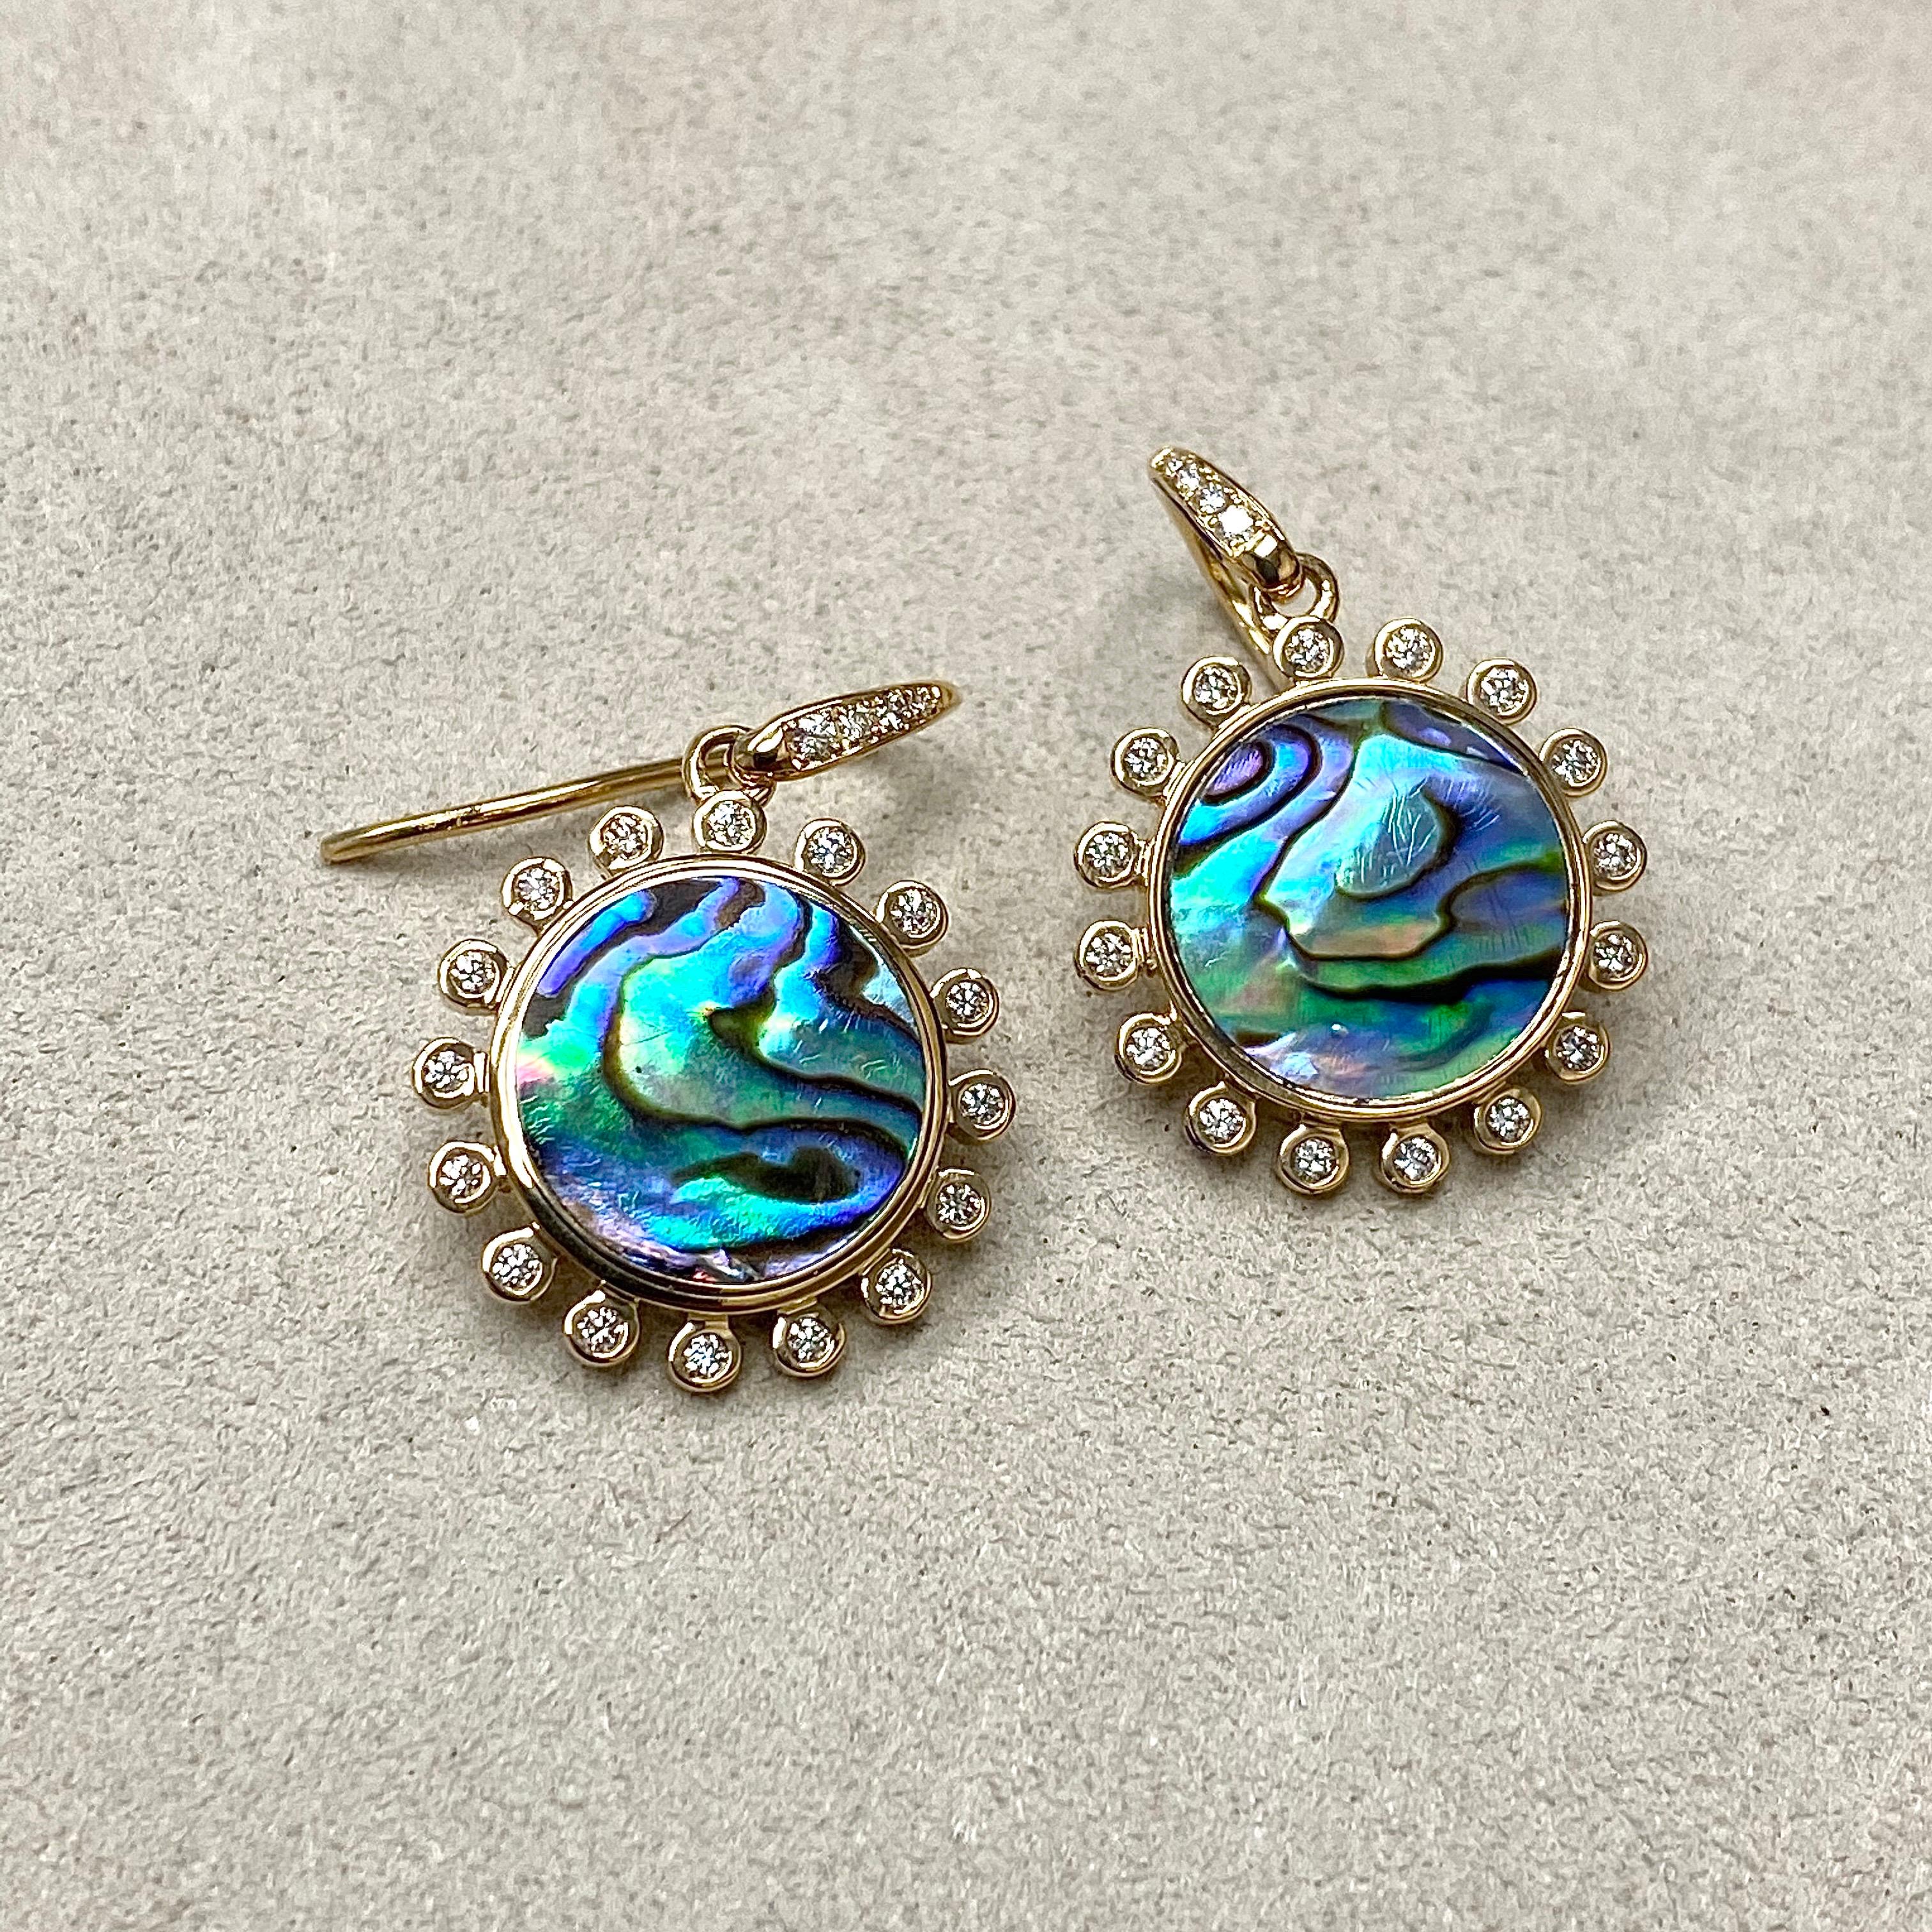 Created in 18 karat yellow gold
Abalone shell 7 cts approx
Diamonds 0.40 cts approx
Limited edition

Experience elegance and exclusivity with these exquisitely crafted Candy Blue Topaz and Diamond Earrings. Embellished with 7 cts of Abalone shell